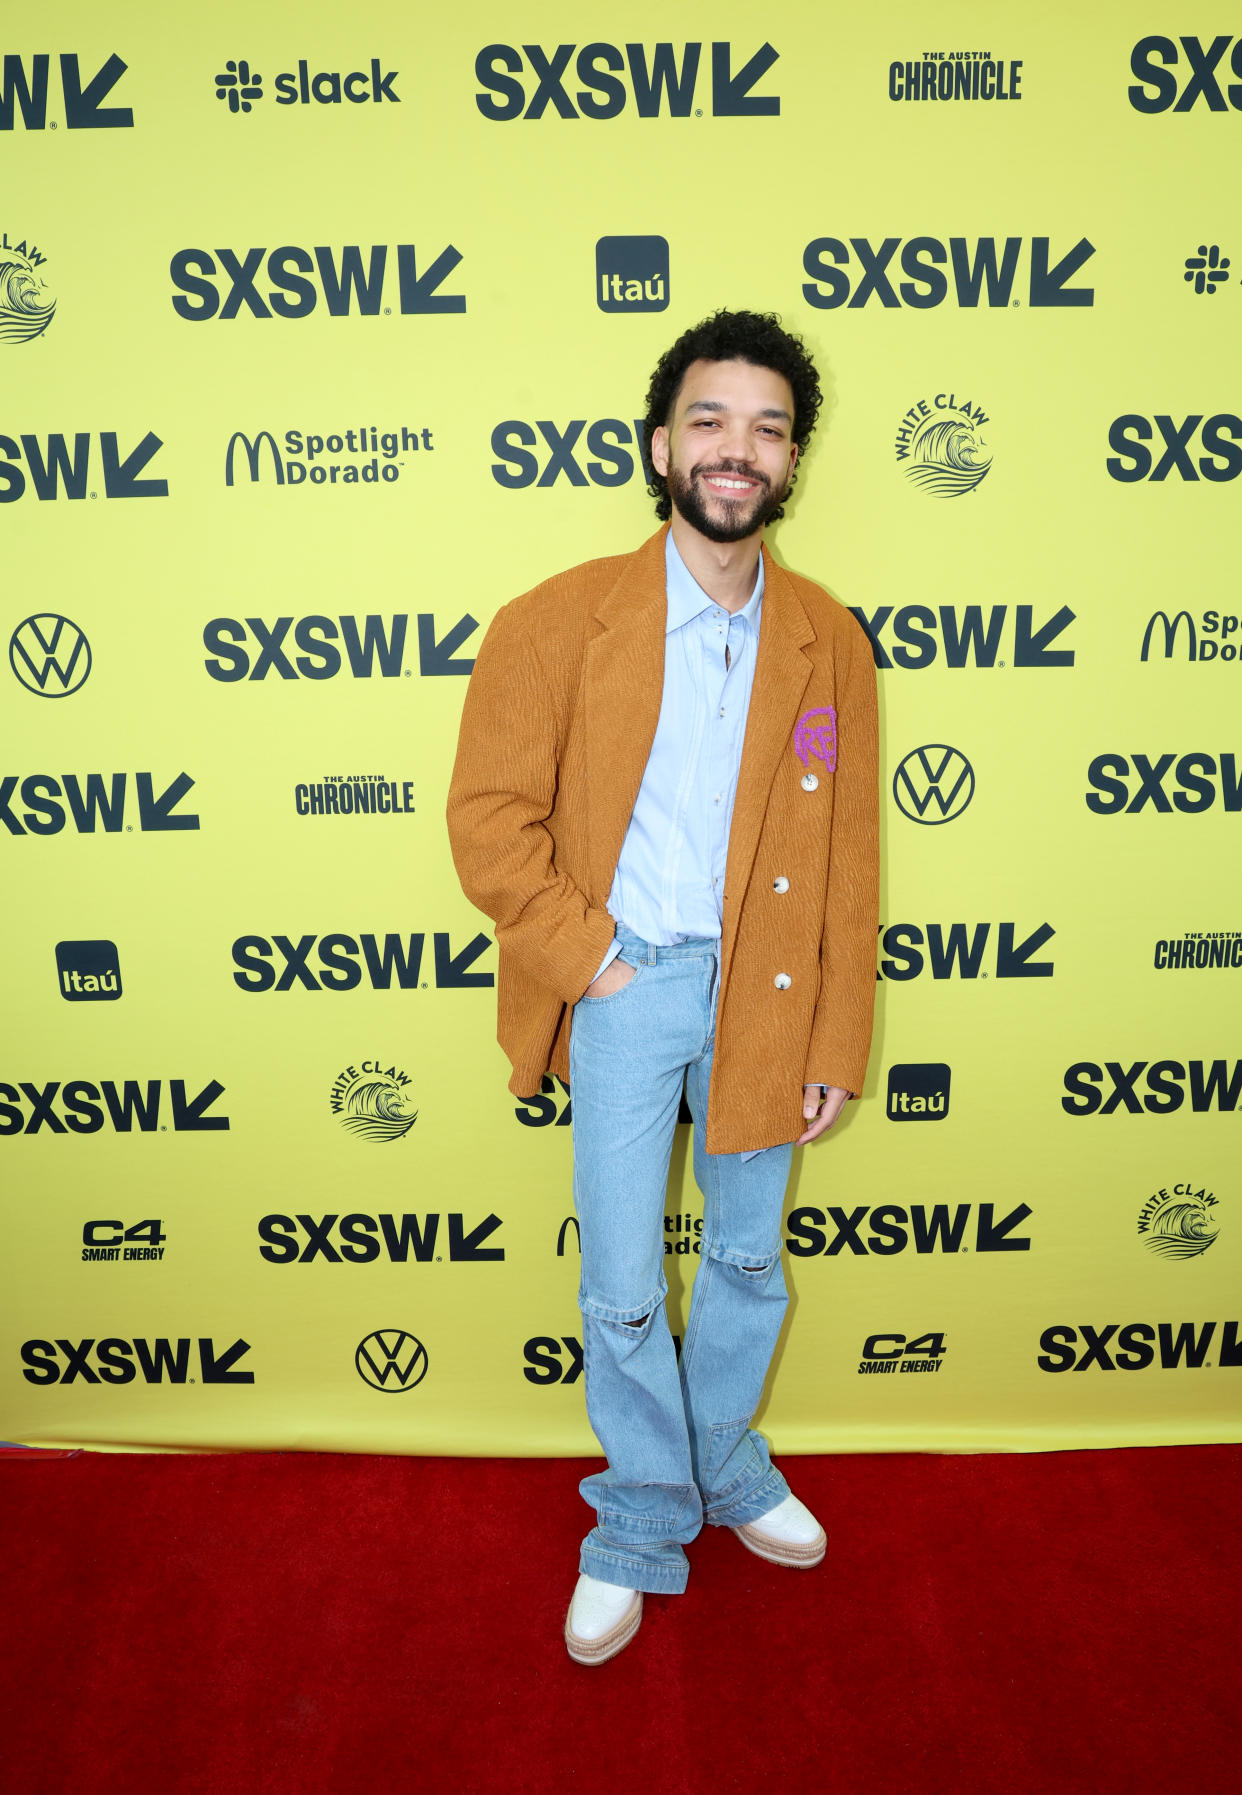 AUSTIN, TEXAS - MARCH 10: Justice Smith attends the premiere of Dungeons And Dragons at the Paramount Theatre during the 2023 SXSW Conference And Festival at the Austin Convention Center on March 10, 2023 in Austin, Texas. (Photo by Gary Miller/WireImage)